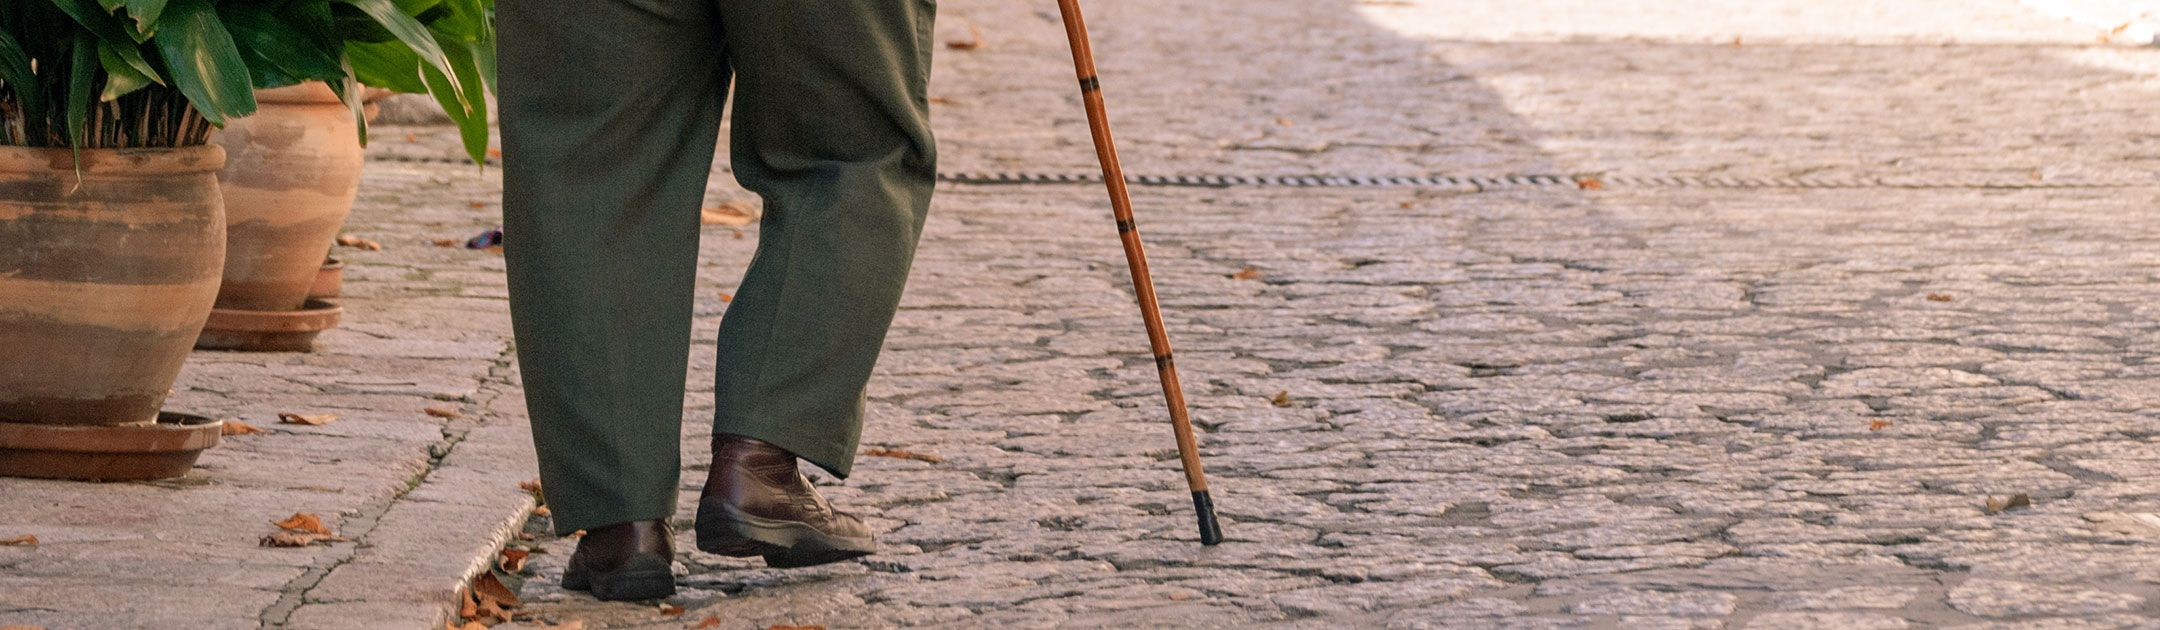 Older adult walking with a cane